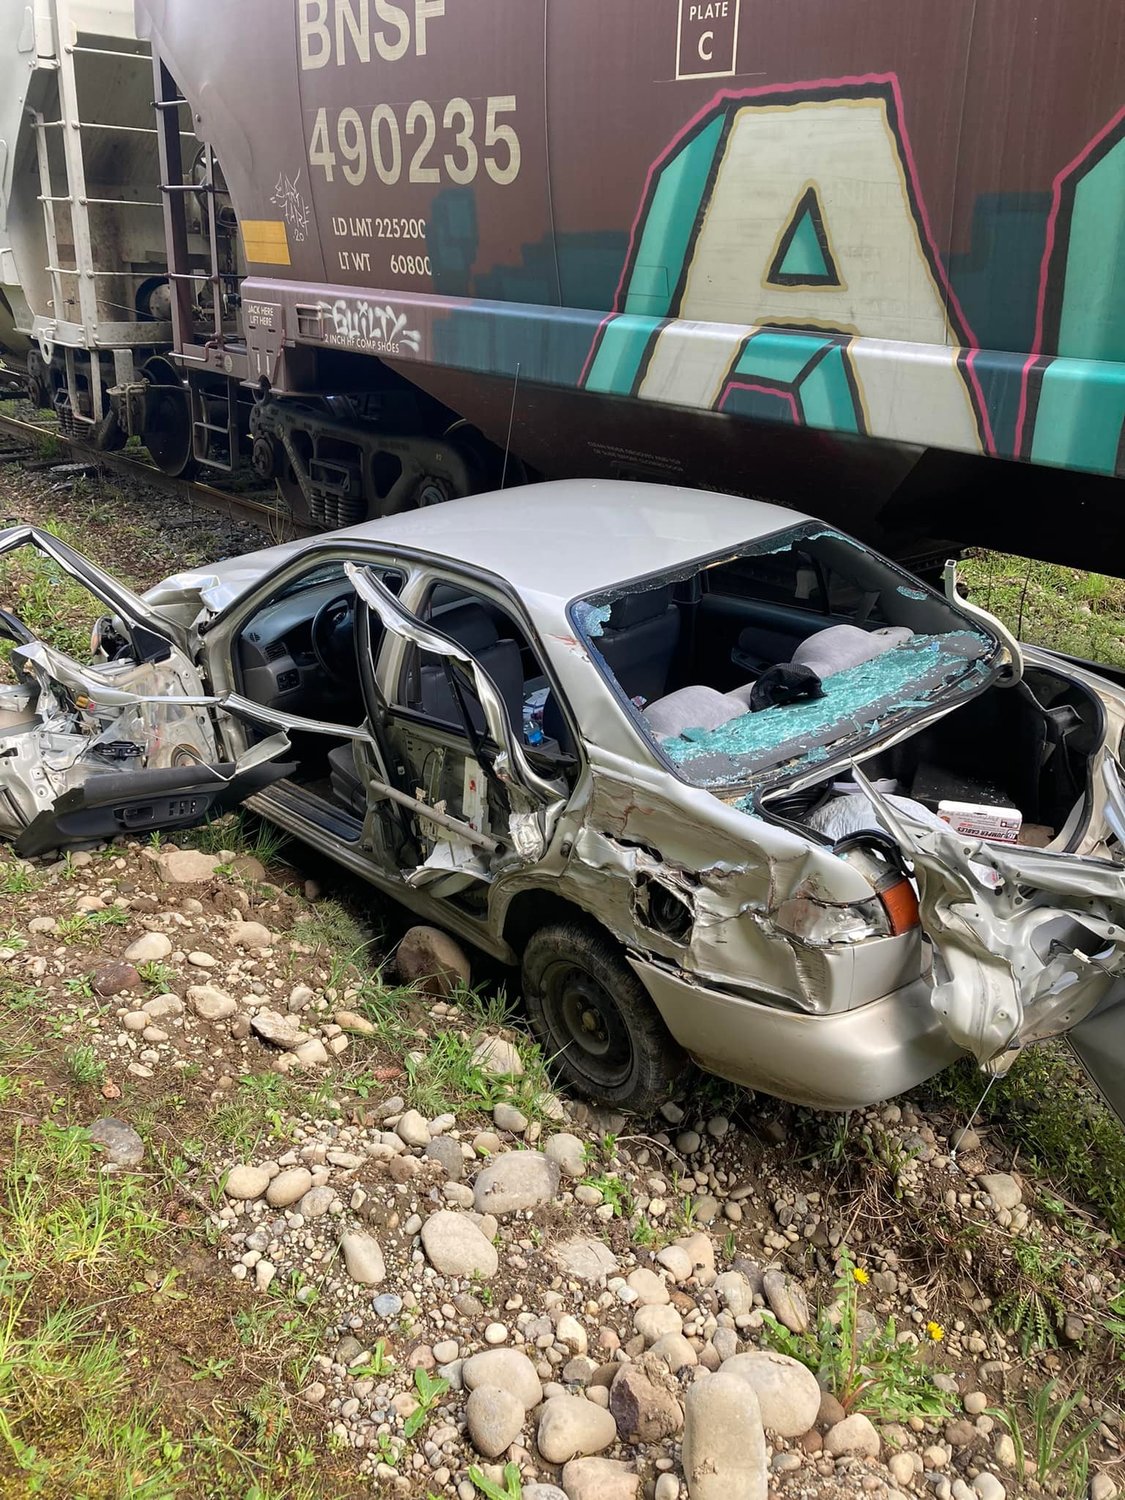 A train versus vehicle collision was reported in Rainier on May 10.